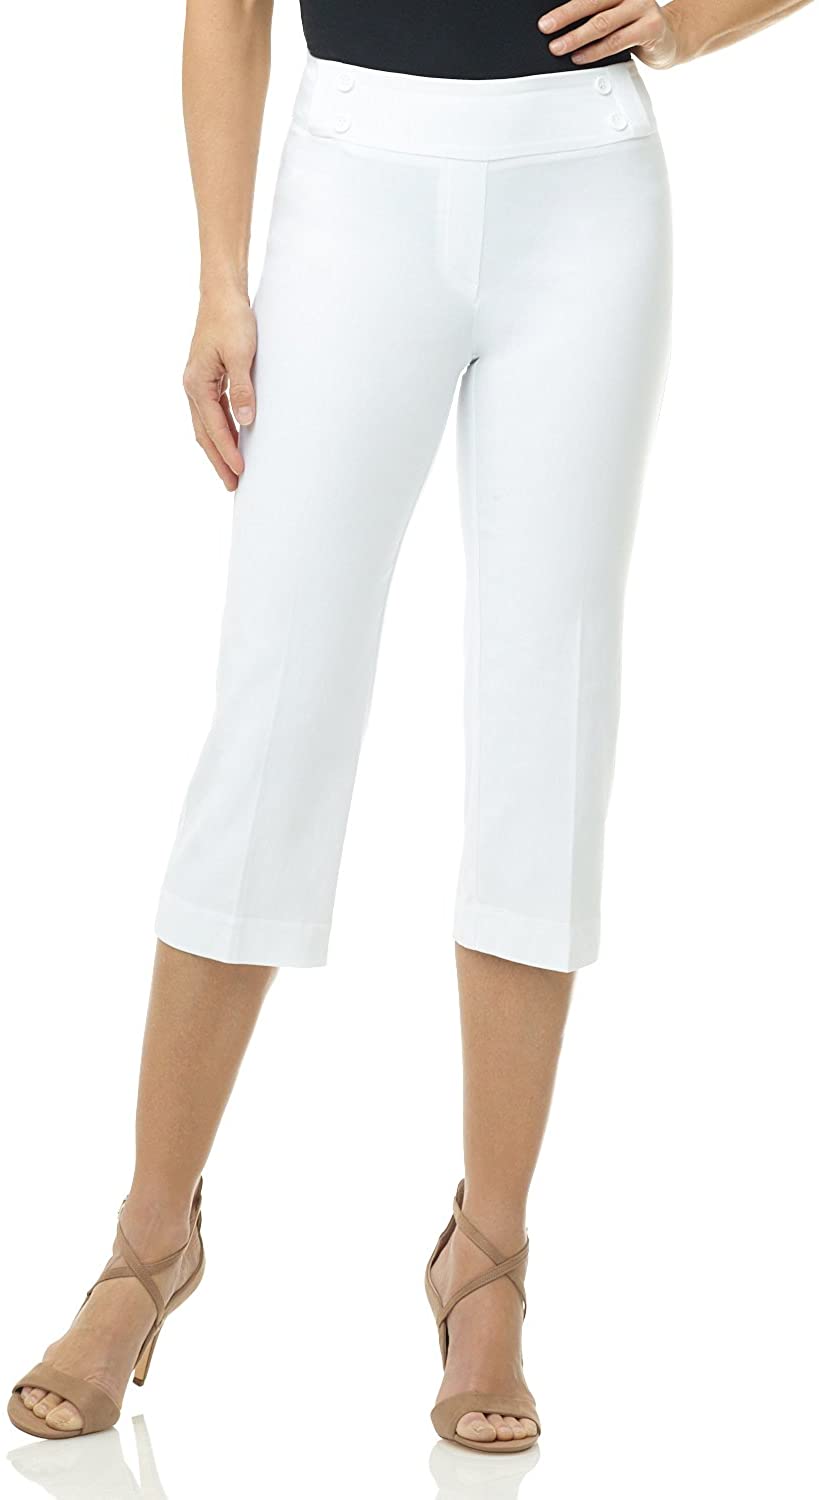 Rekucci Womens Ease into Comfort Capri with Button Detail 